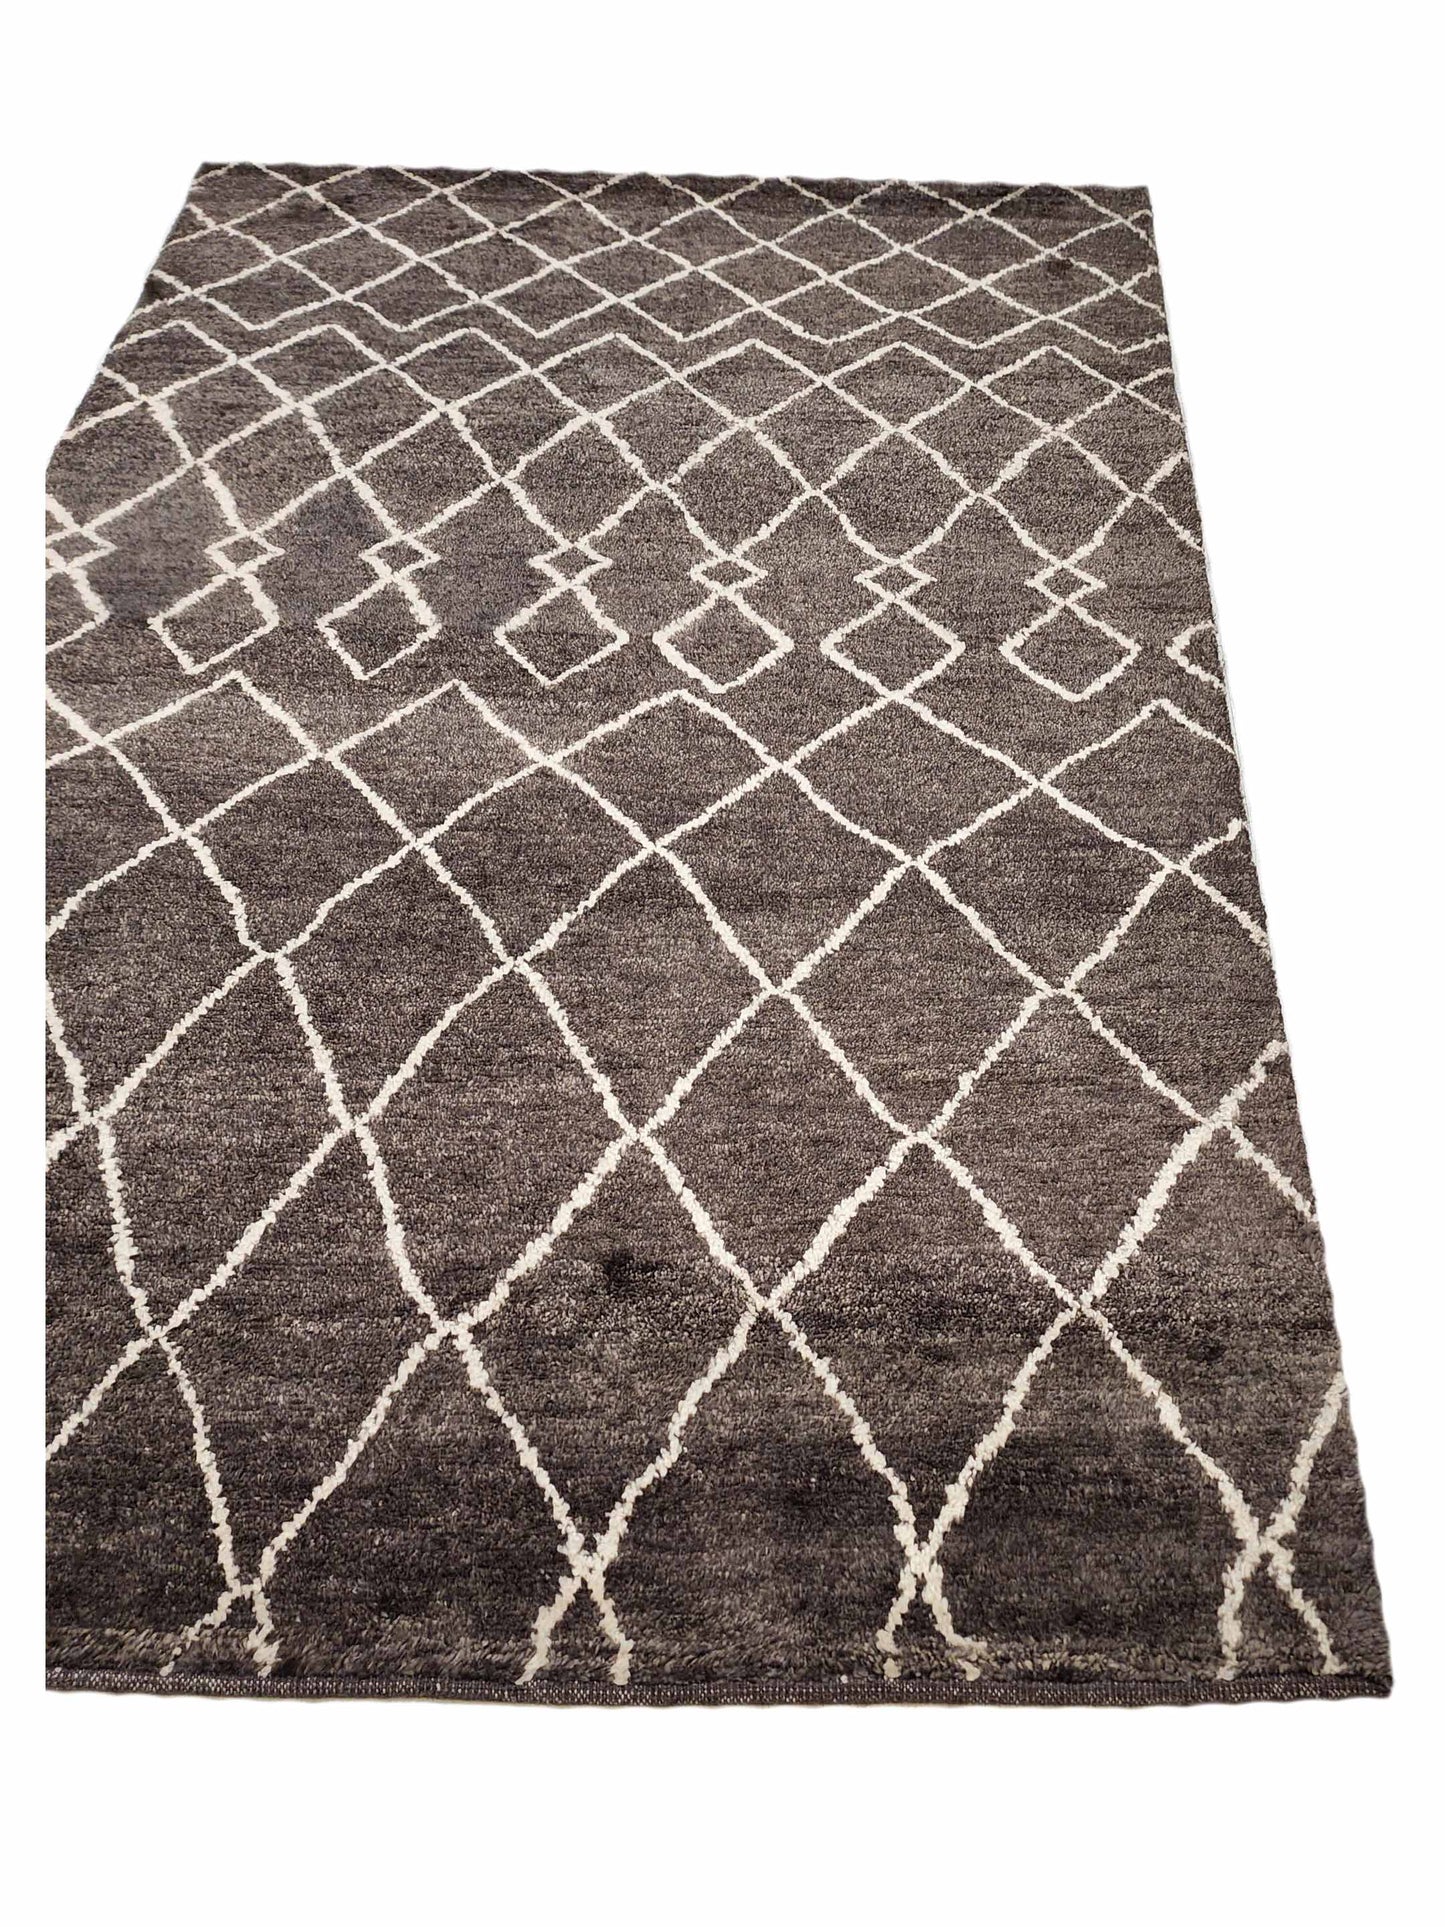 Artisan Marion  Brown  Transitional Knotted Rug